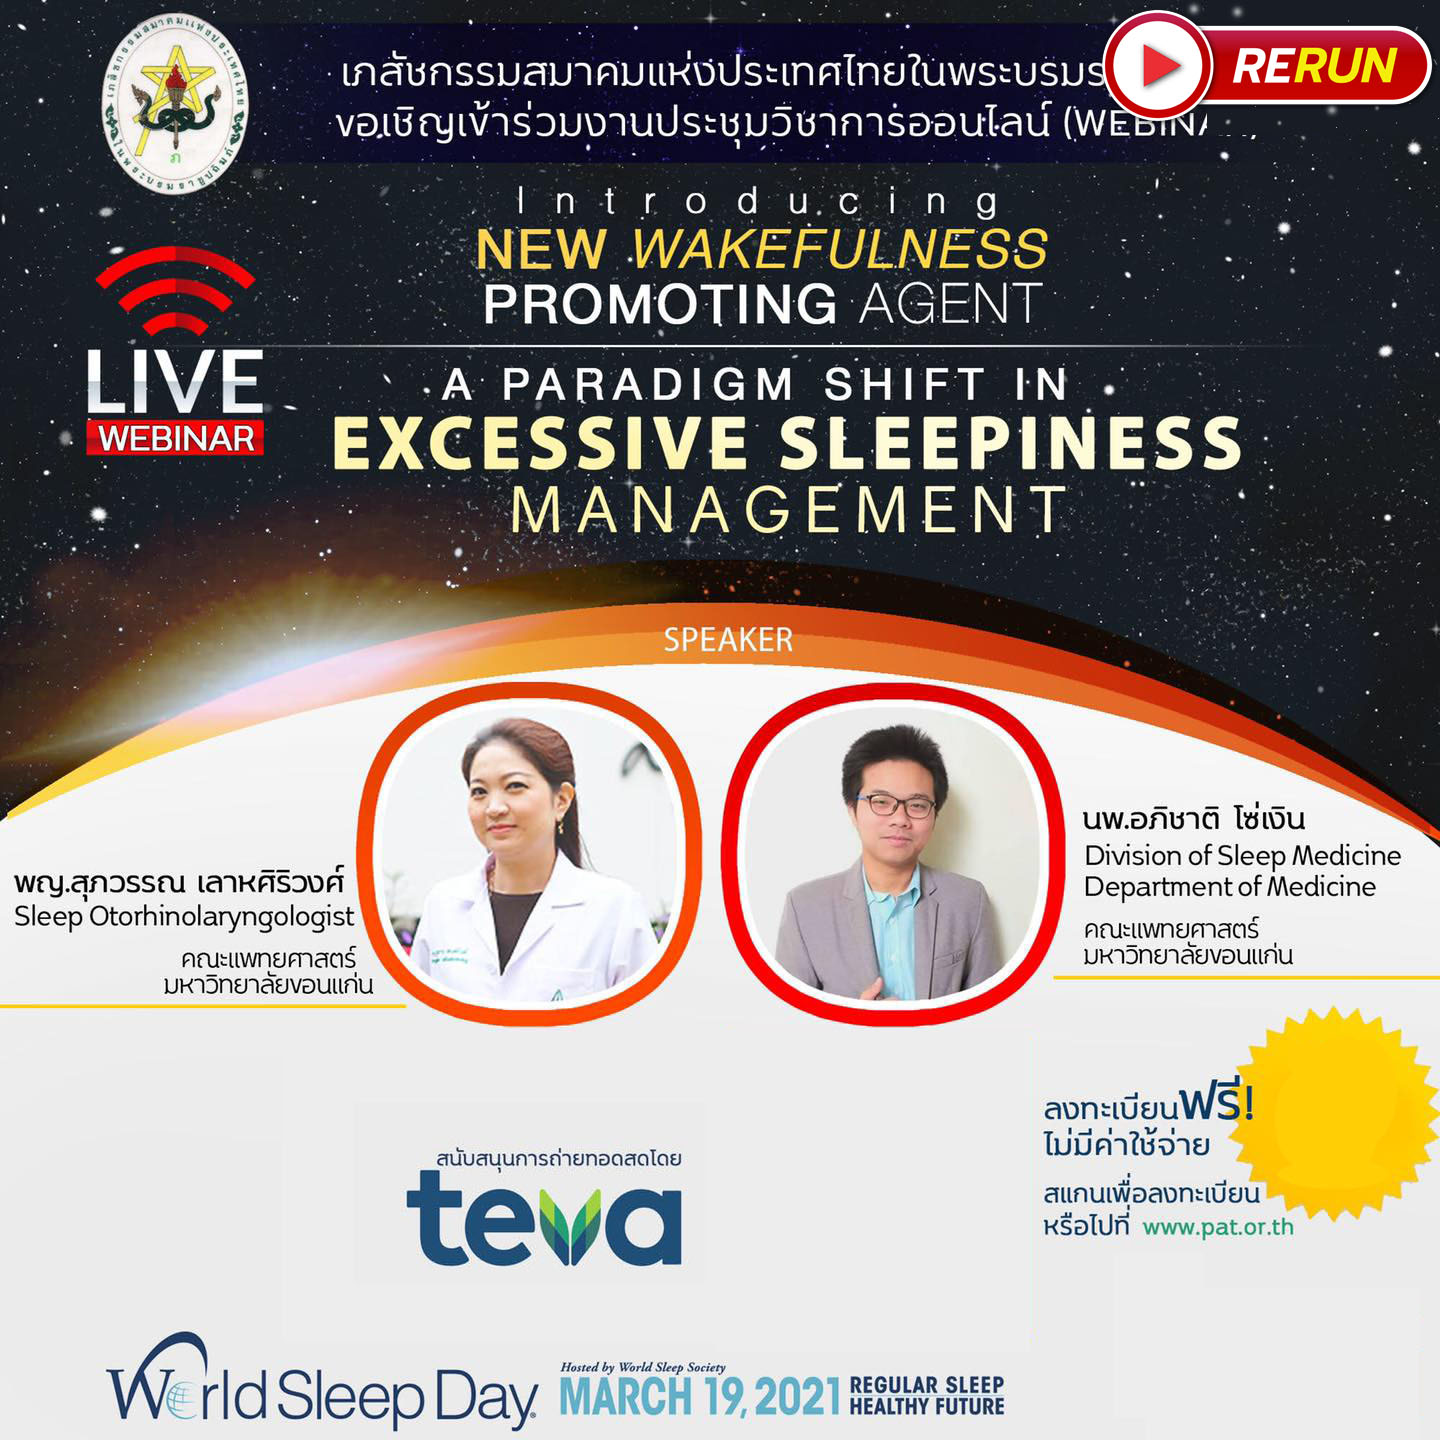 A Paradigm Shift in Excessive Sleepiness Management